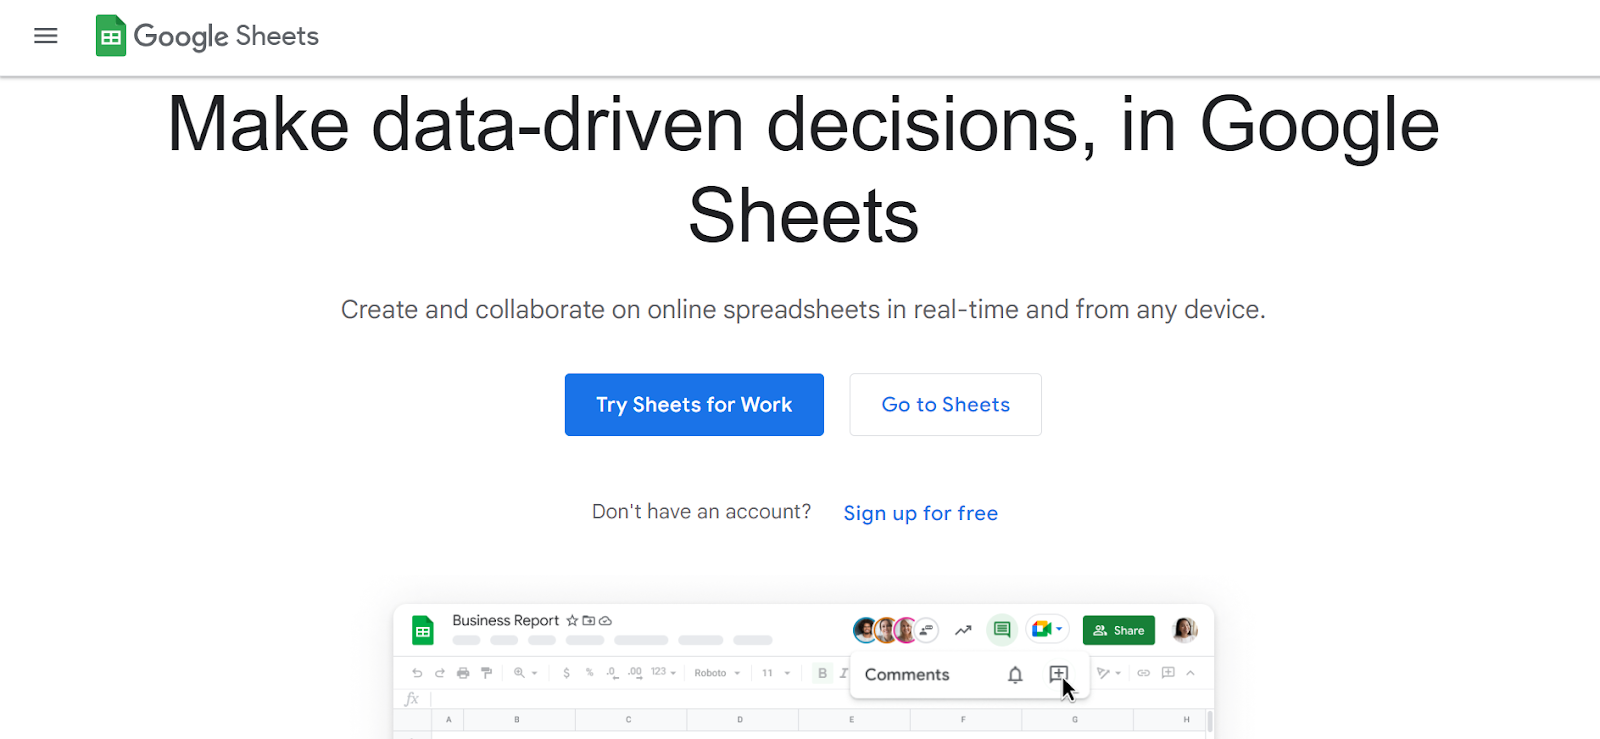 Google Sheets is a free growth hacking tool that helps with project management